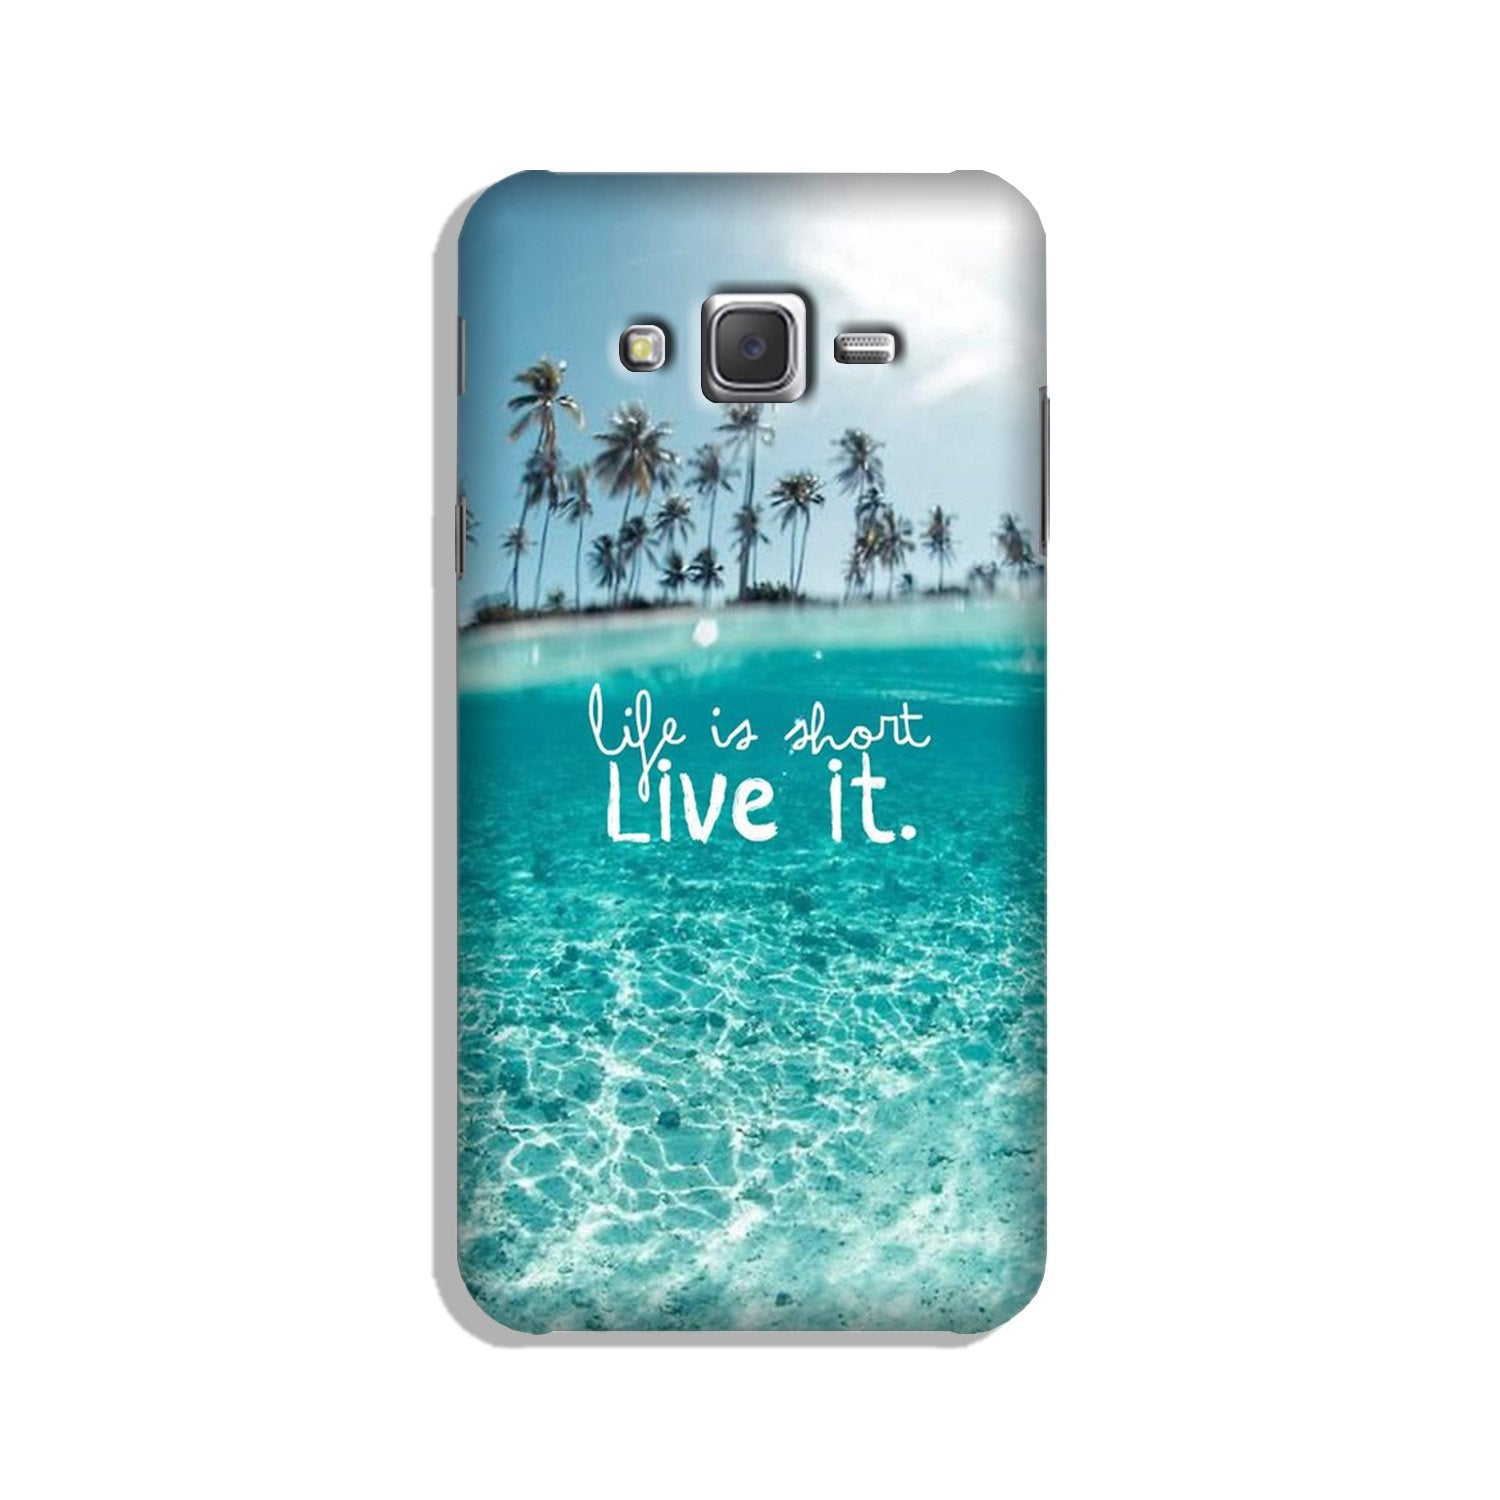 Life is short live it Case for Galaxy J7 (2015)